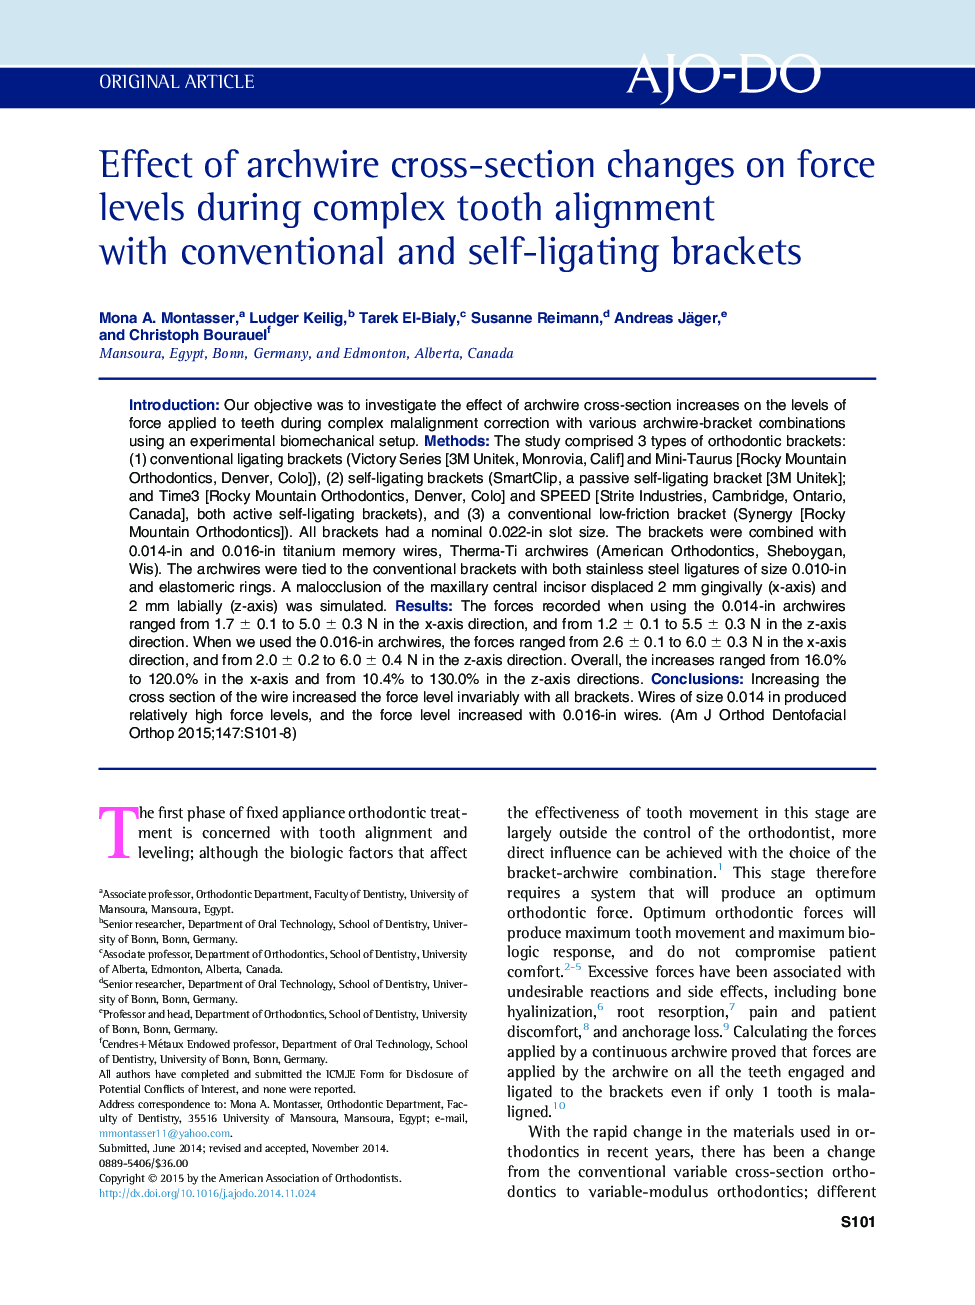 Effect of archwire cross-section changes on force levels during complex tooth alignment with conventional and self-ligating brackets 